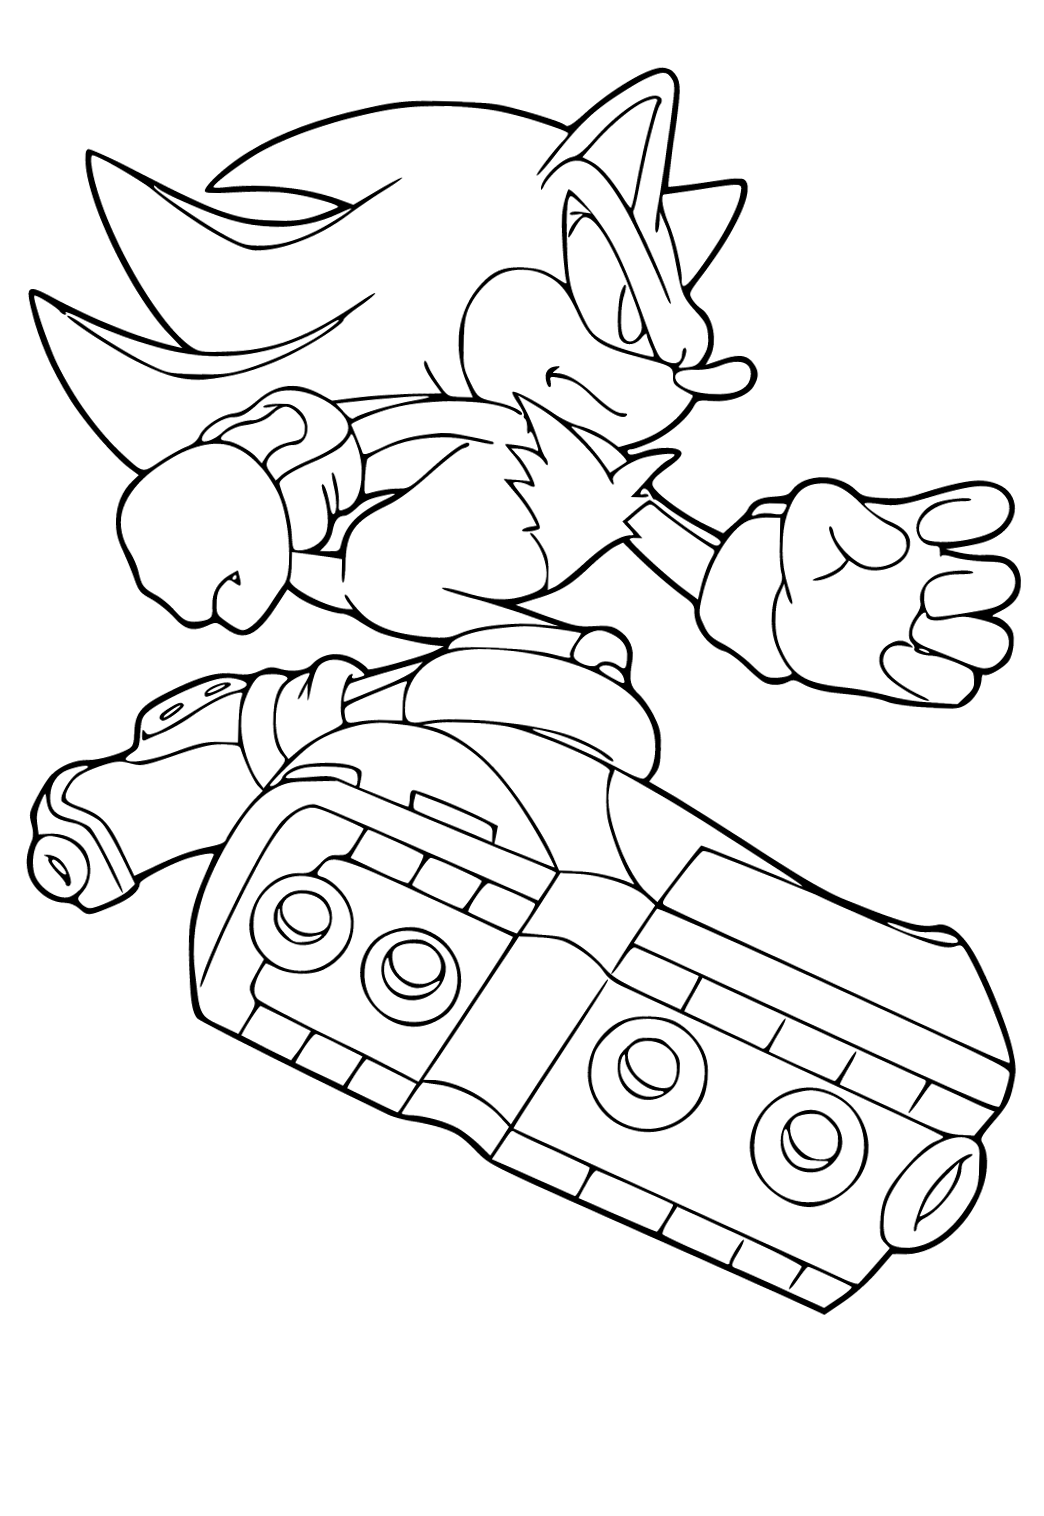 Free printable shadow the hedgehog flight coloring page for adults and kids